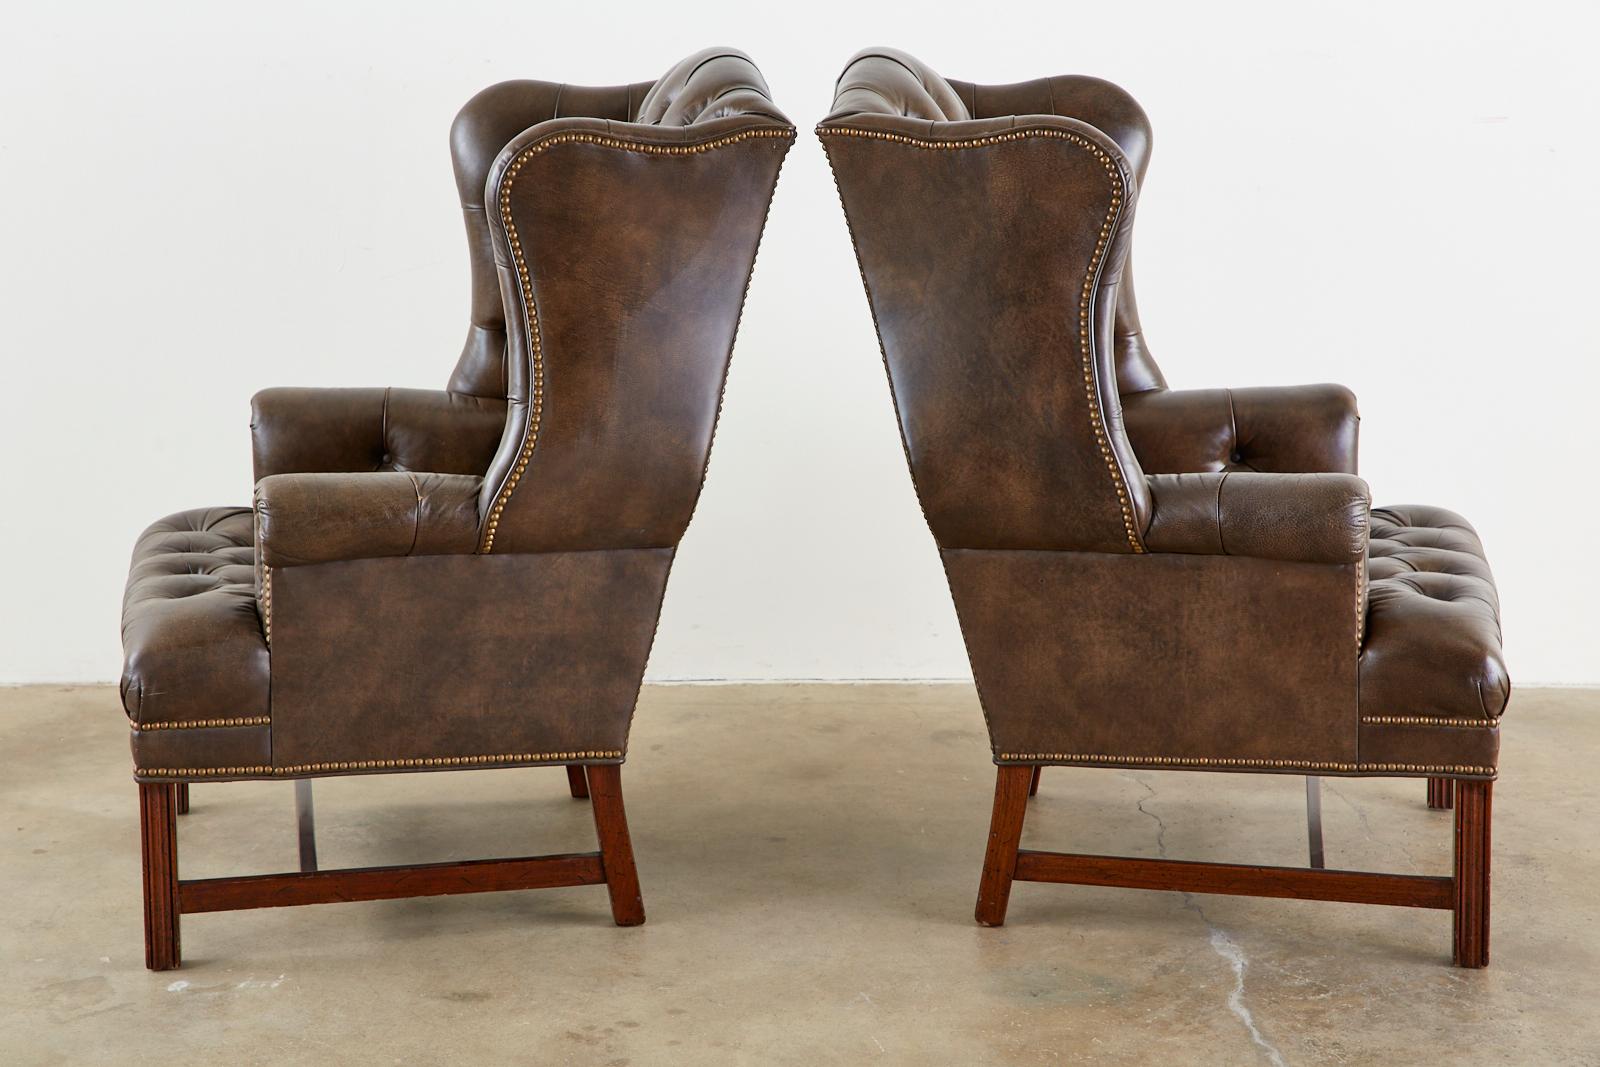 20th Century Pair of English Georgian Style Tufted Leather Wingbacks with Ottoman